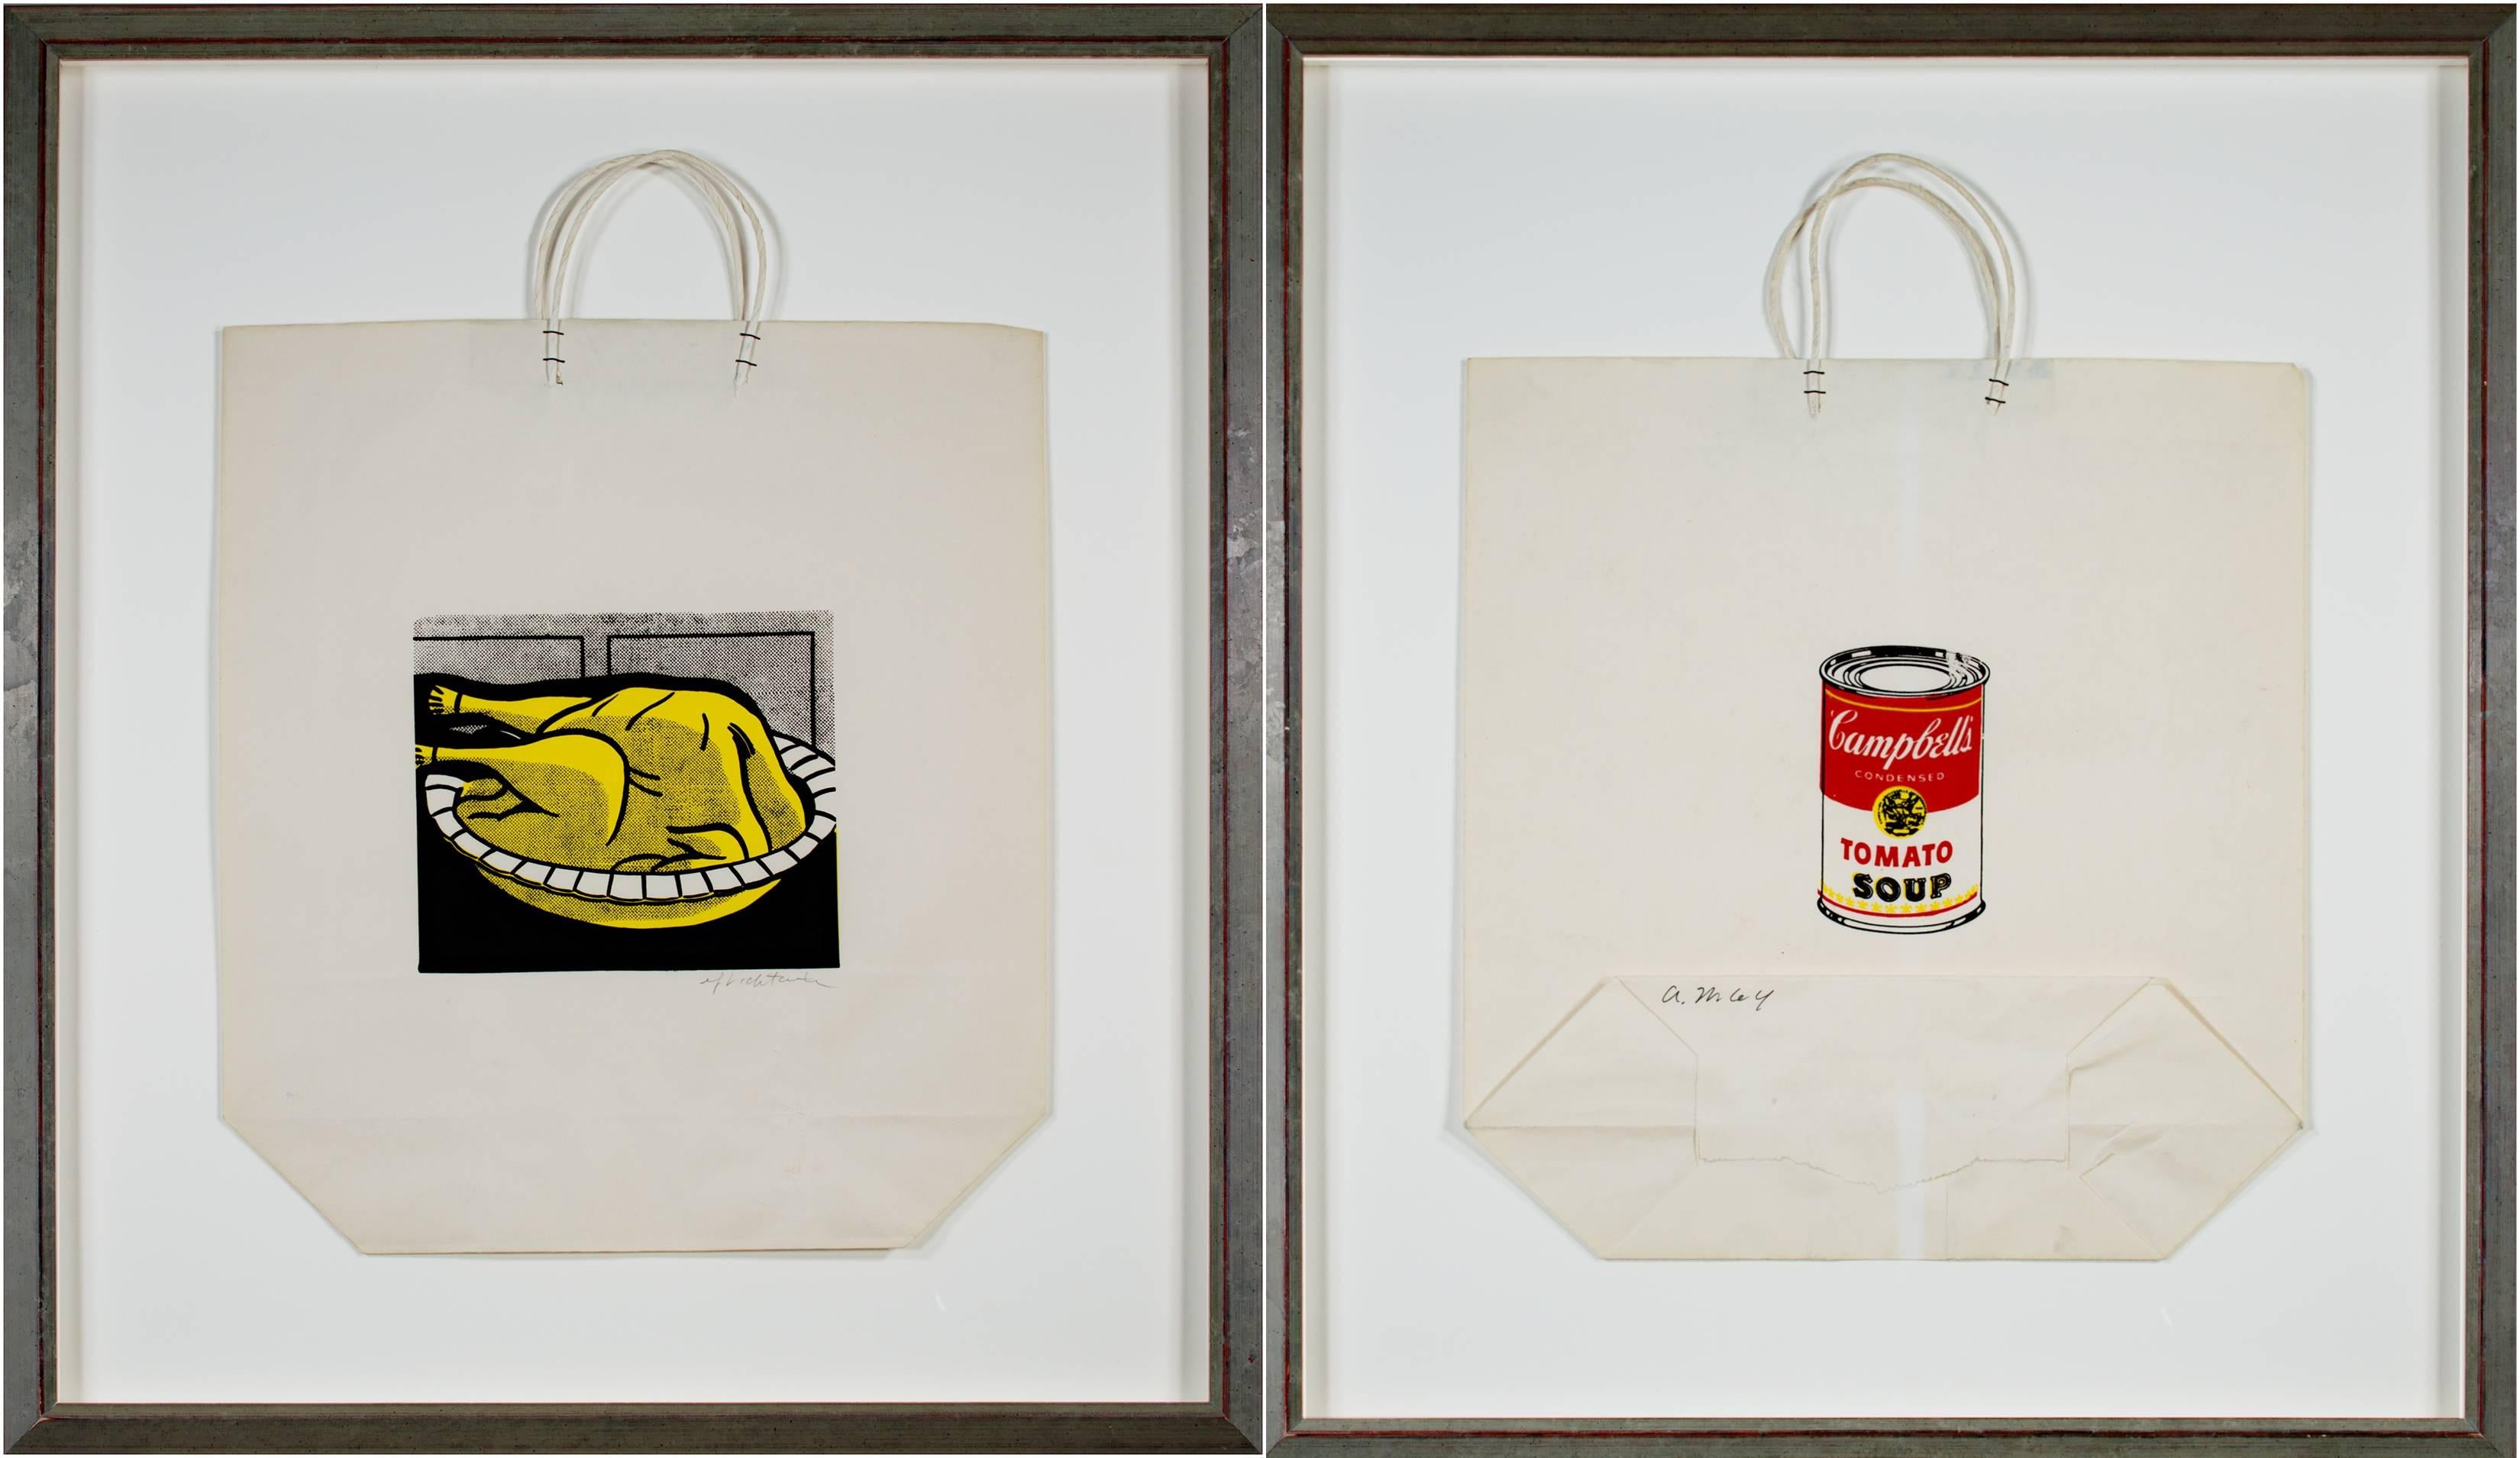 "Turkey Pie" and "Campbell's Soup Can, " Shopping Bags by Warhol & Lichtenstein - Print by Andy Warhol and Roy Lichtenstein